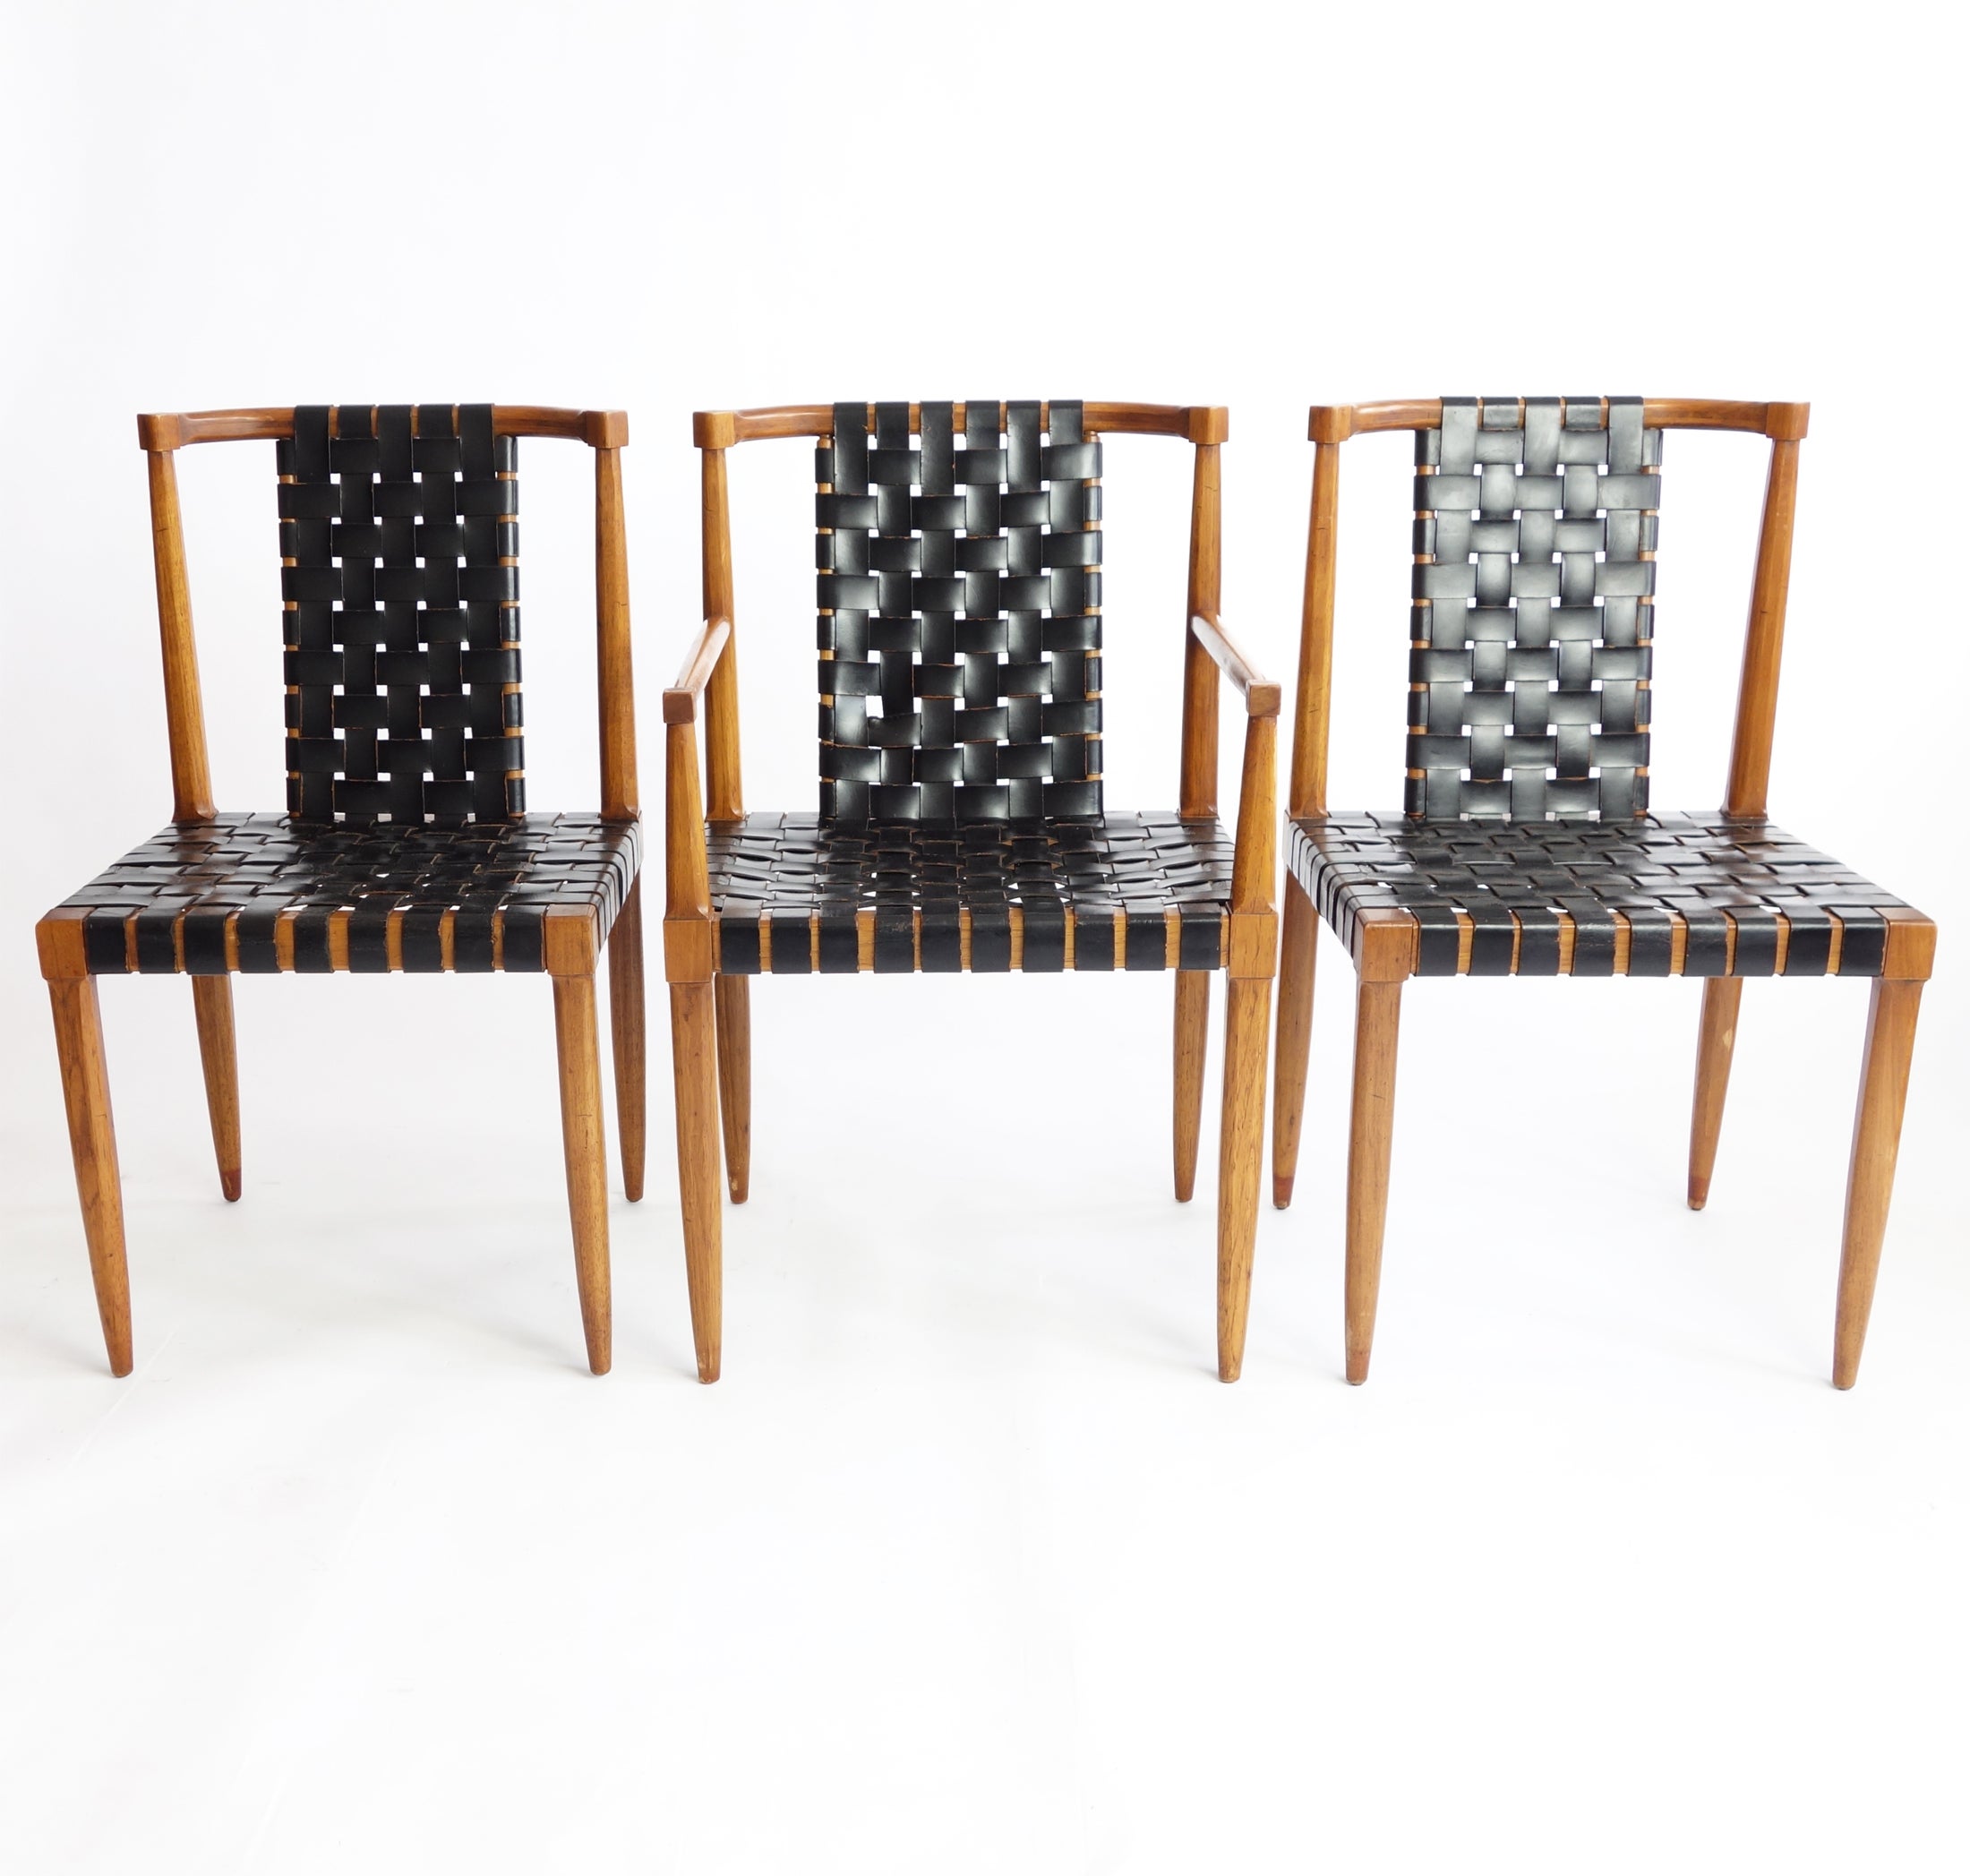 Set of 6 Leather Strap Dining Chairs by Tomlinson